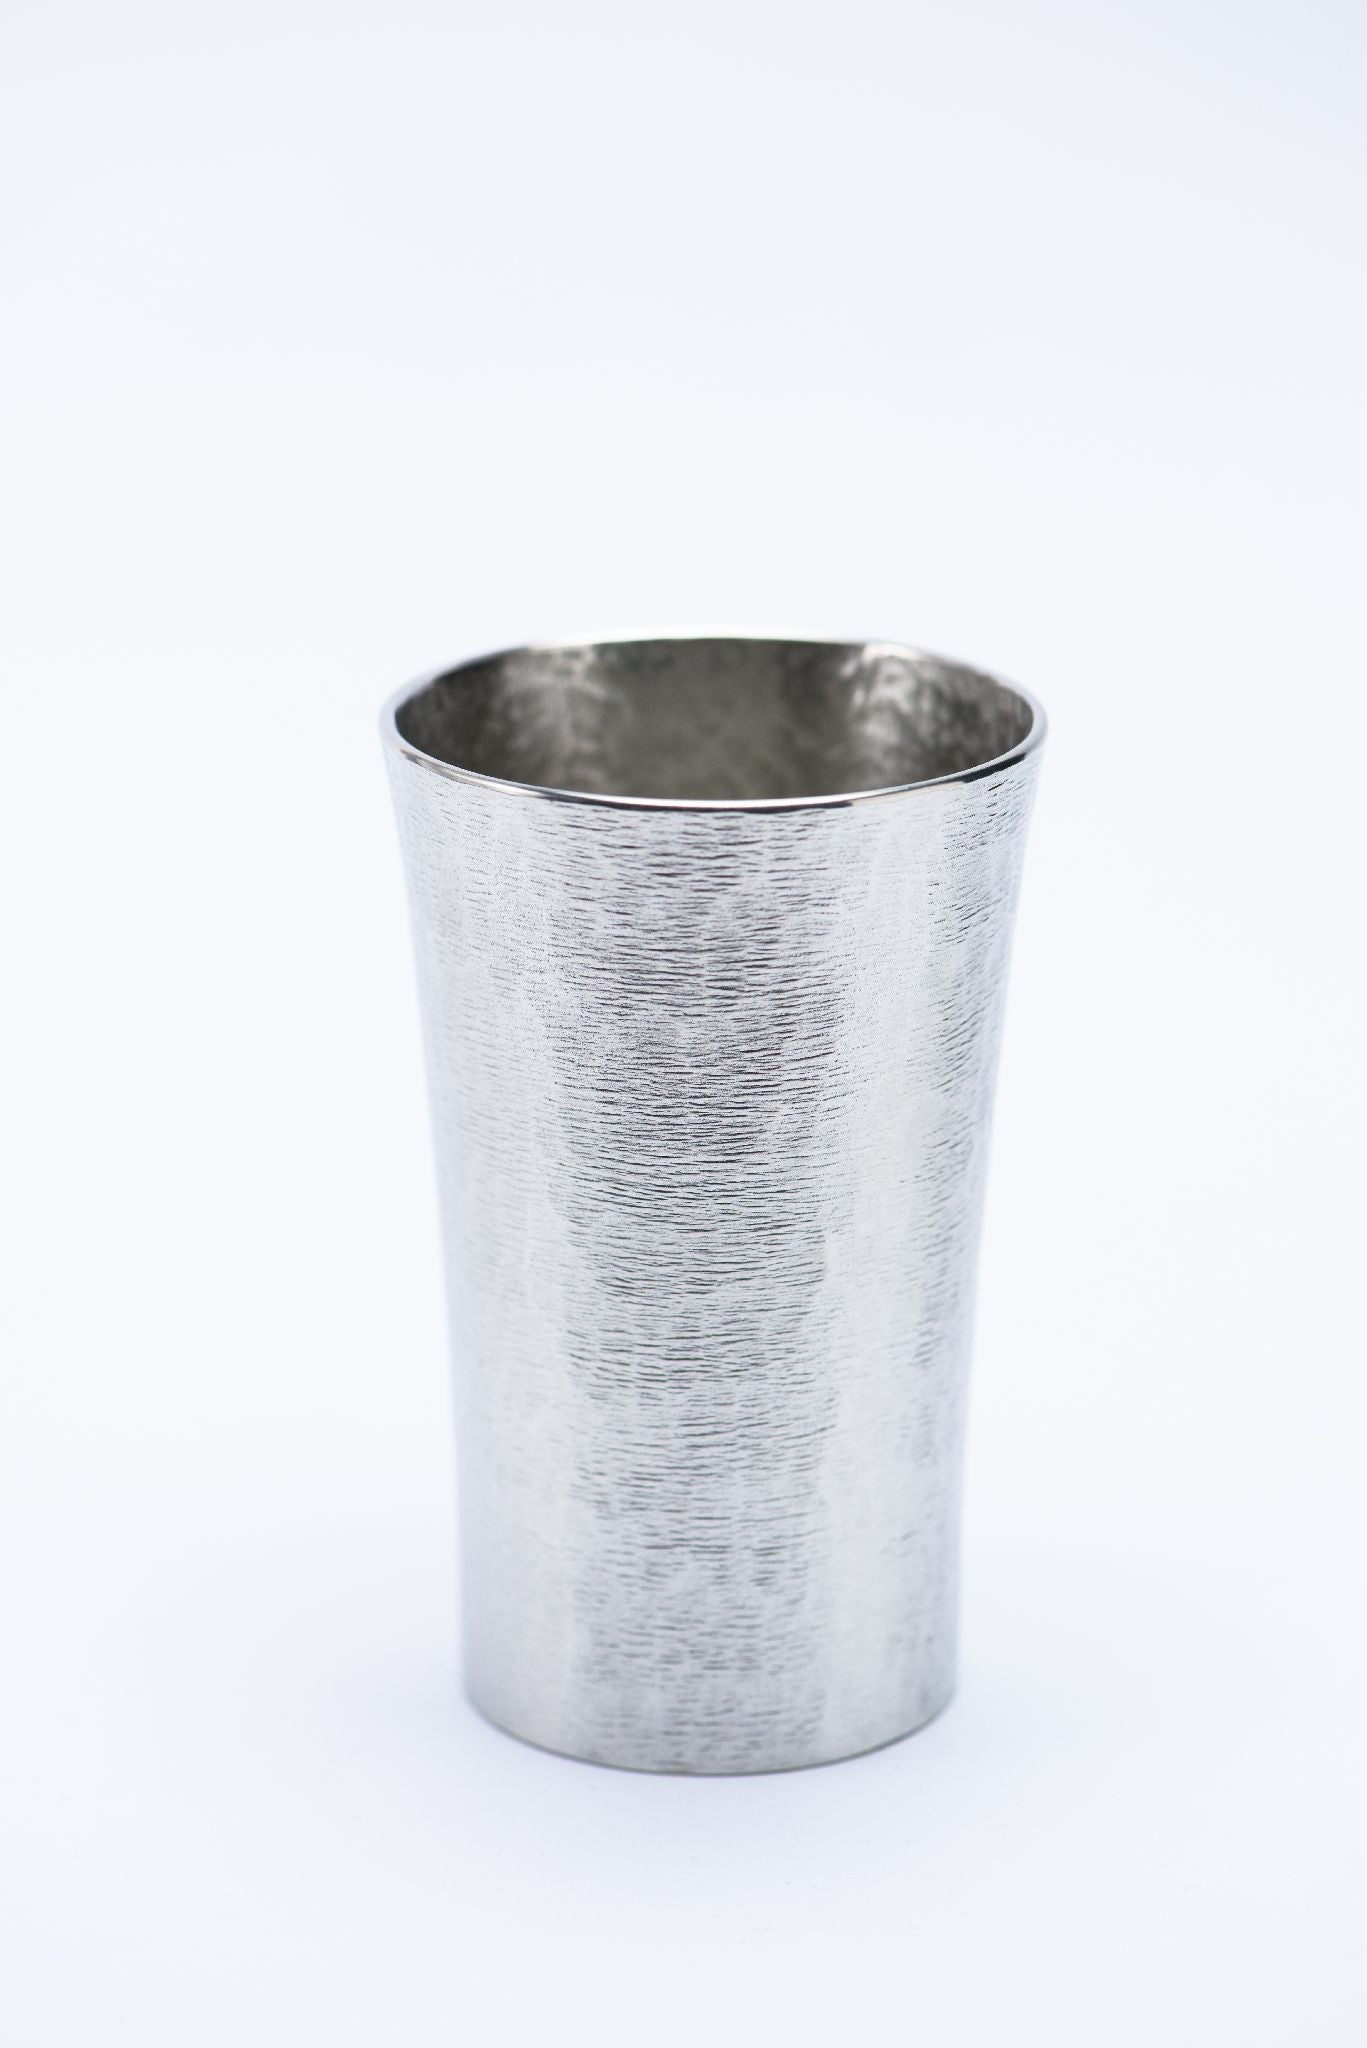 Tin tumbler (The middle size) -Made by Japanese traditional craftsmen-